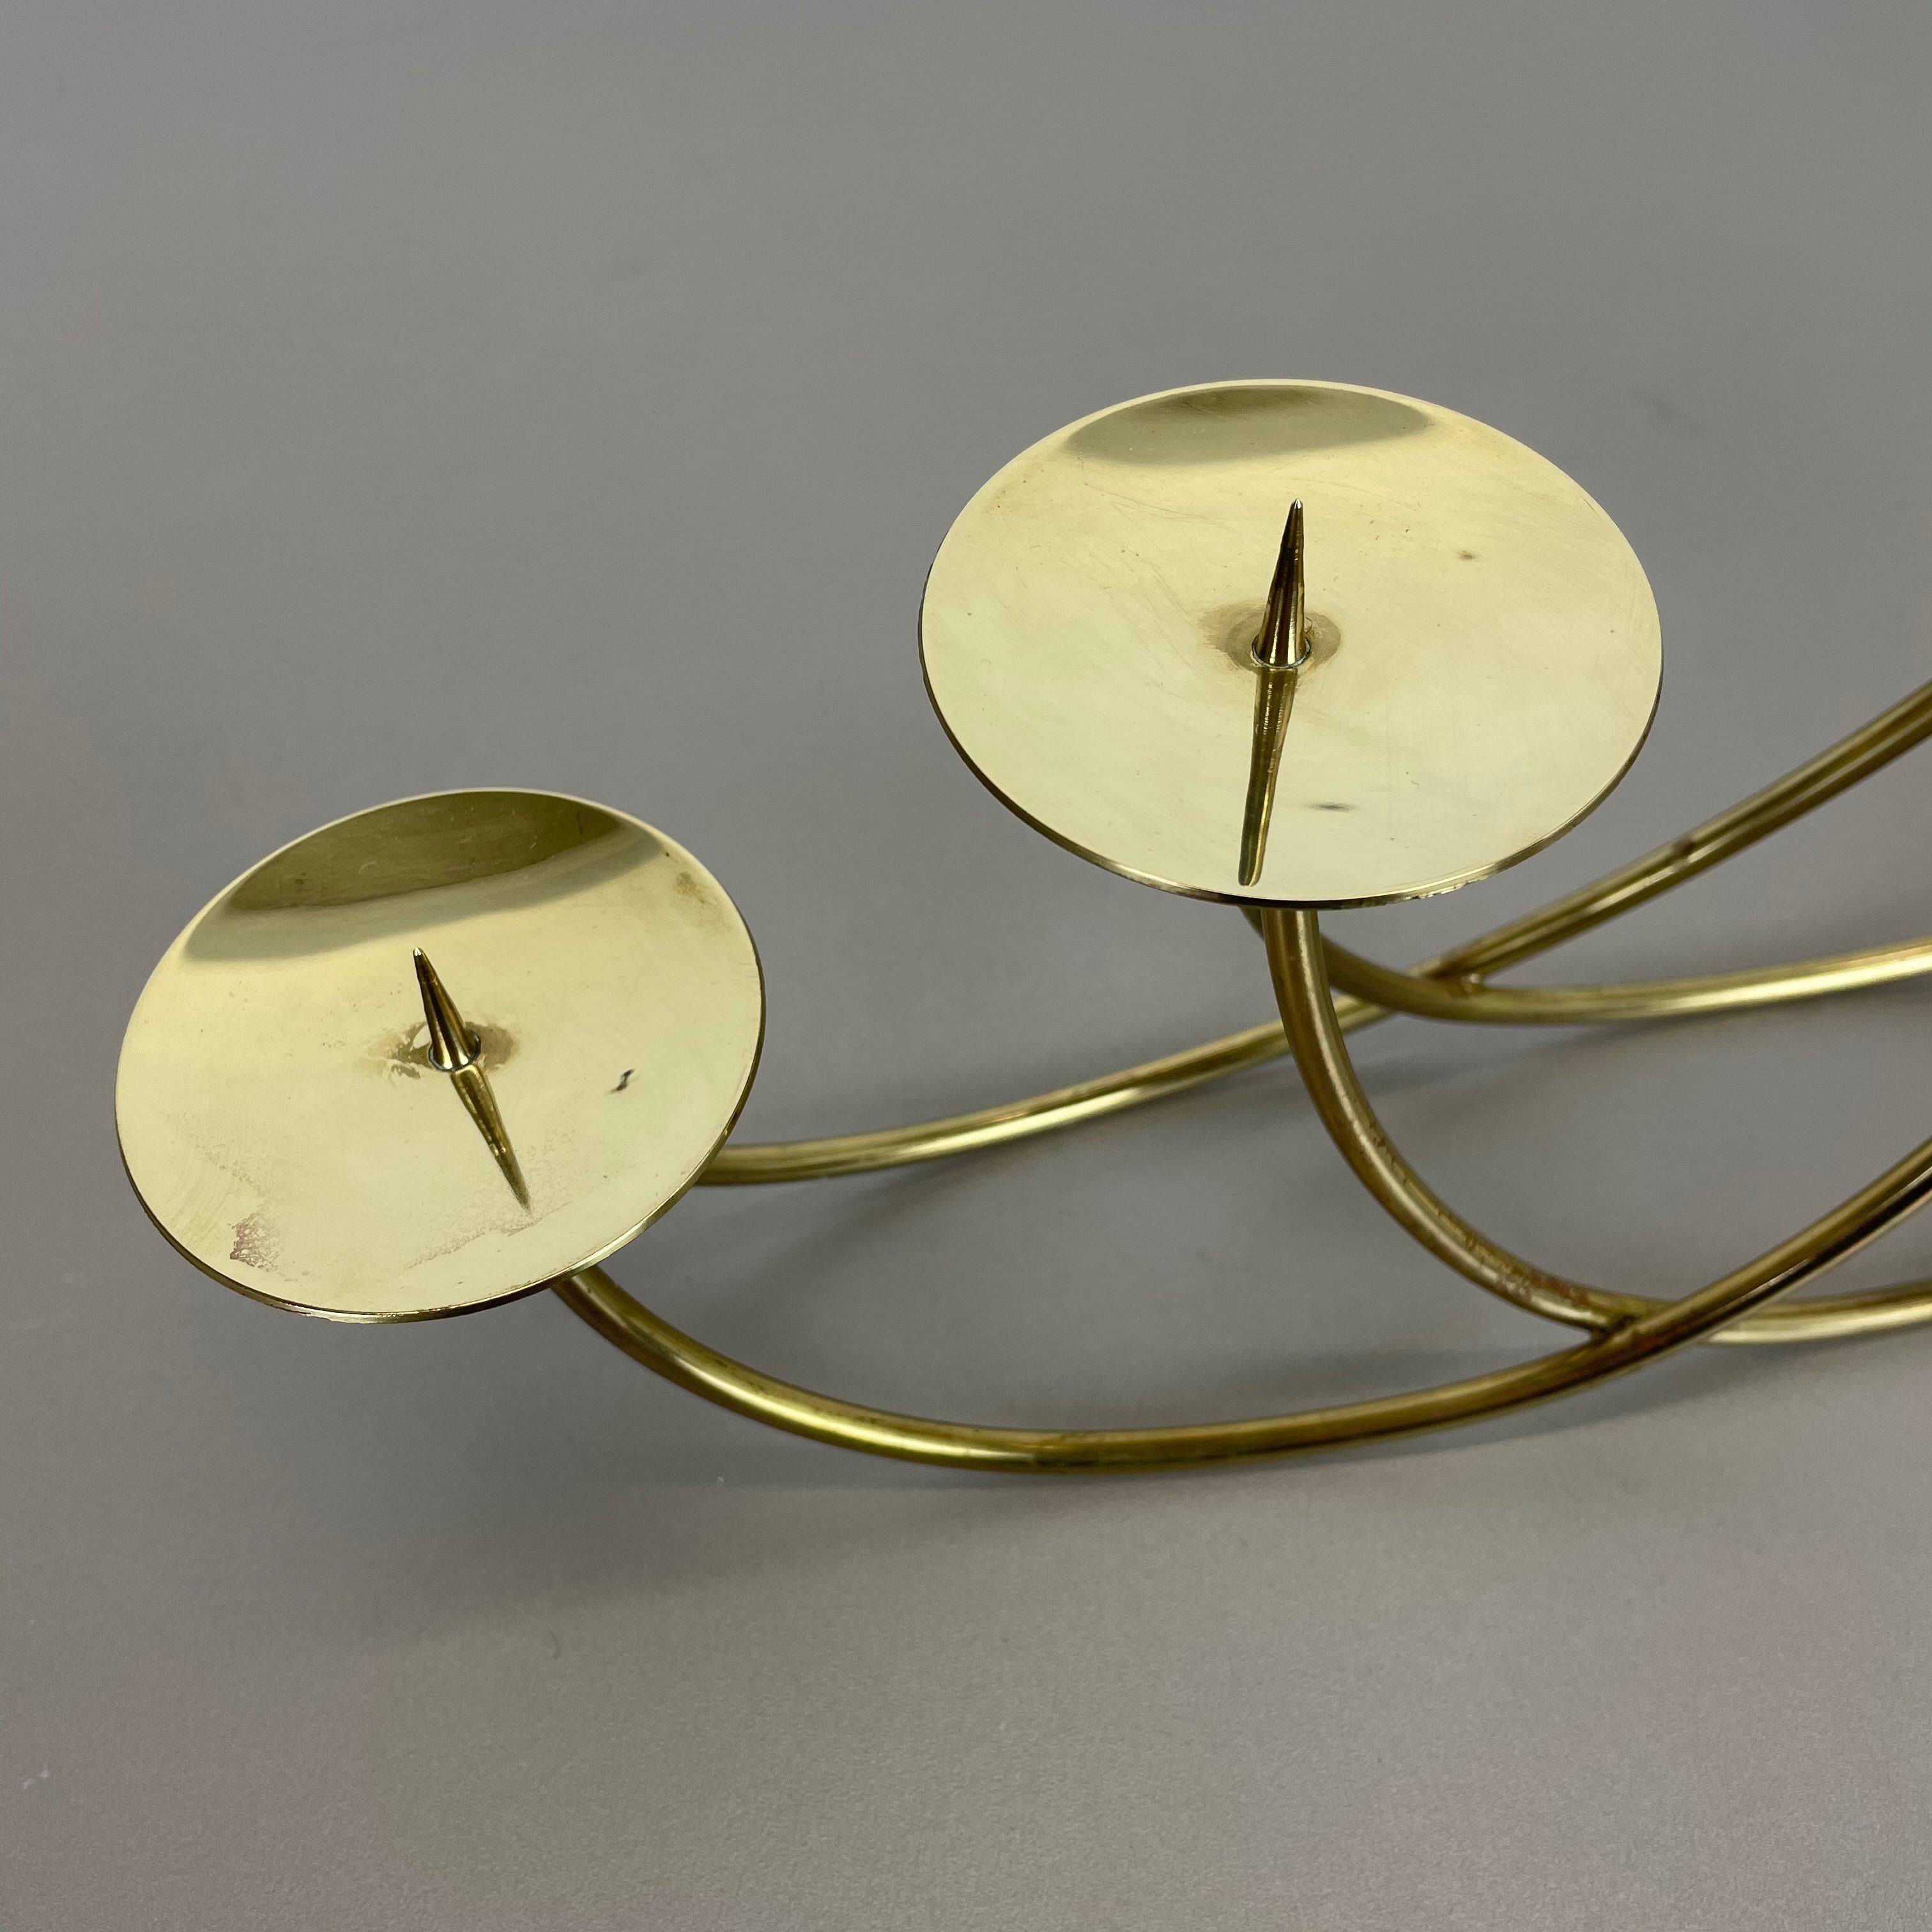 20th Century Sculptural Solid Brass Candleholder by Harald Buchrucker Bauhaus, Germany, 1950s For Sale